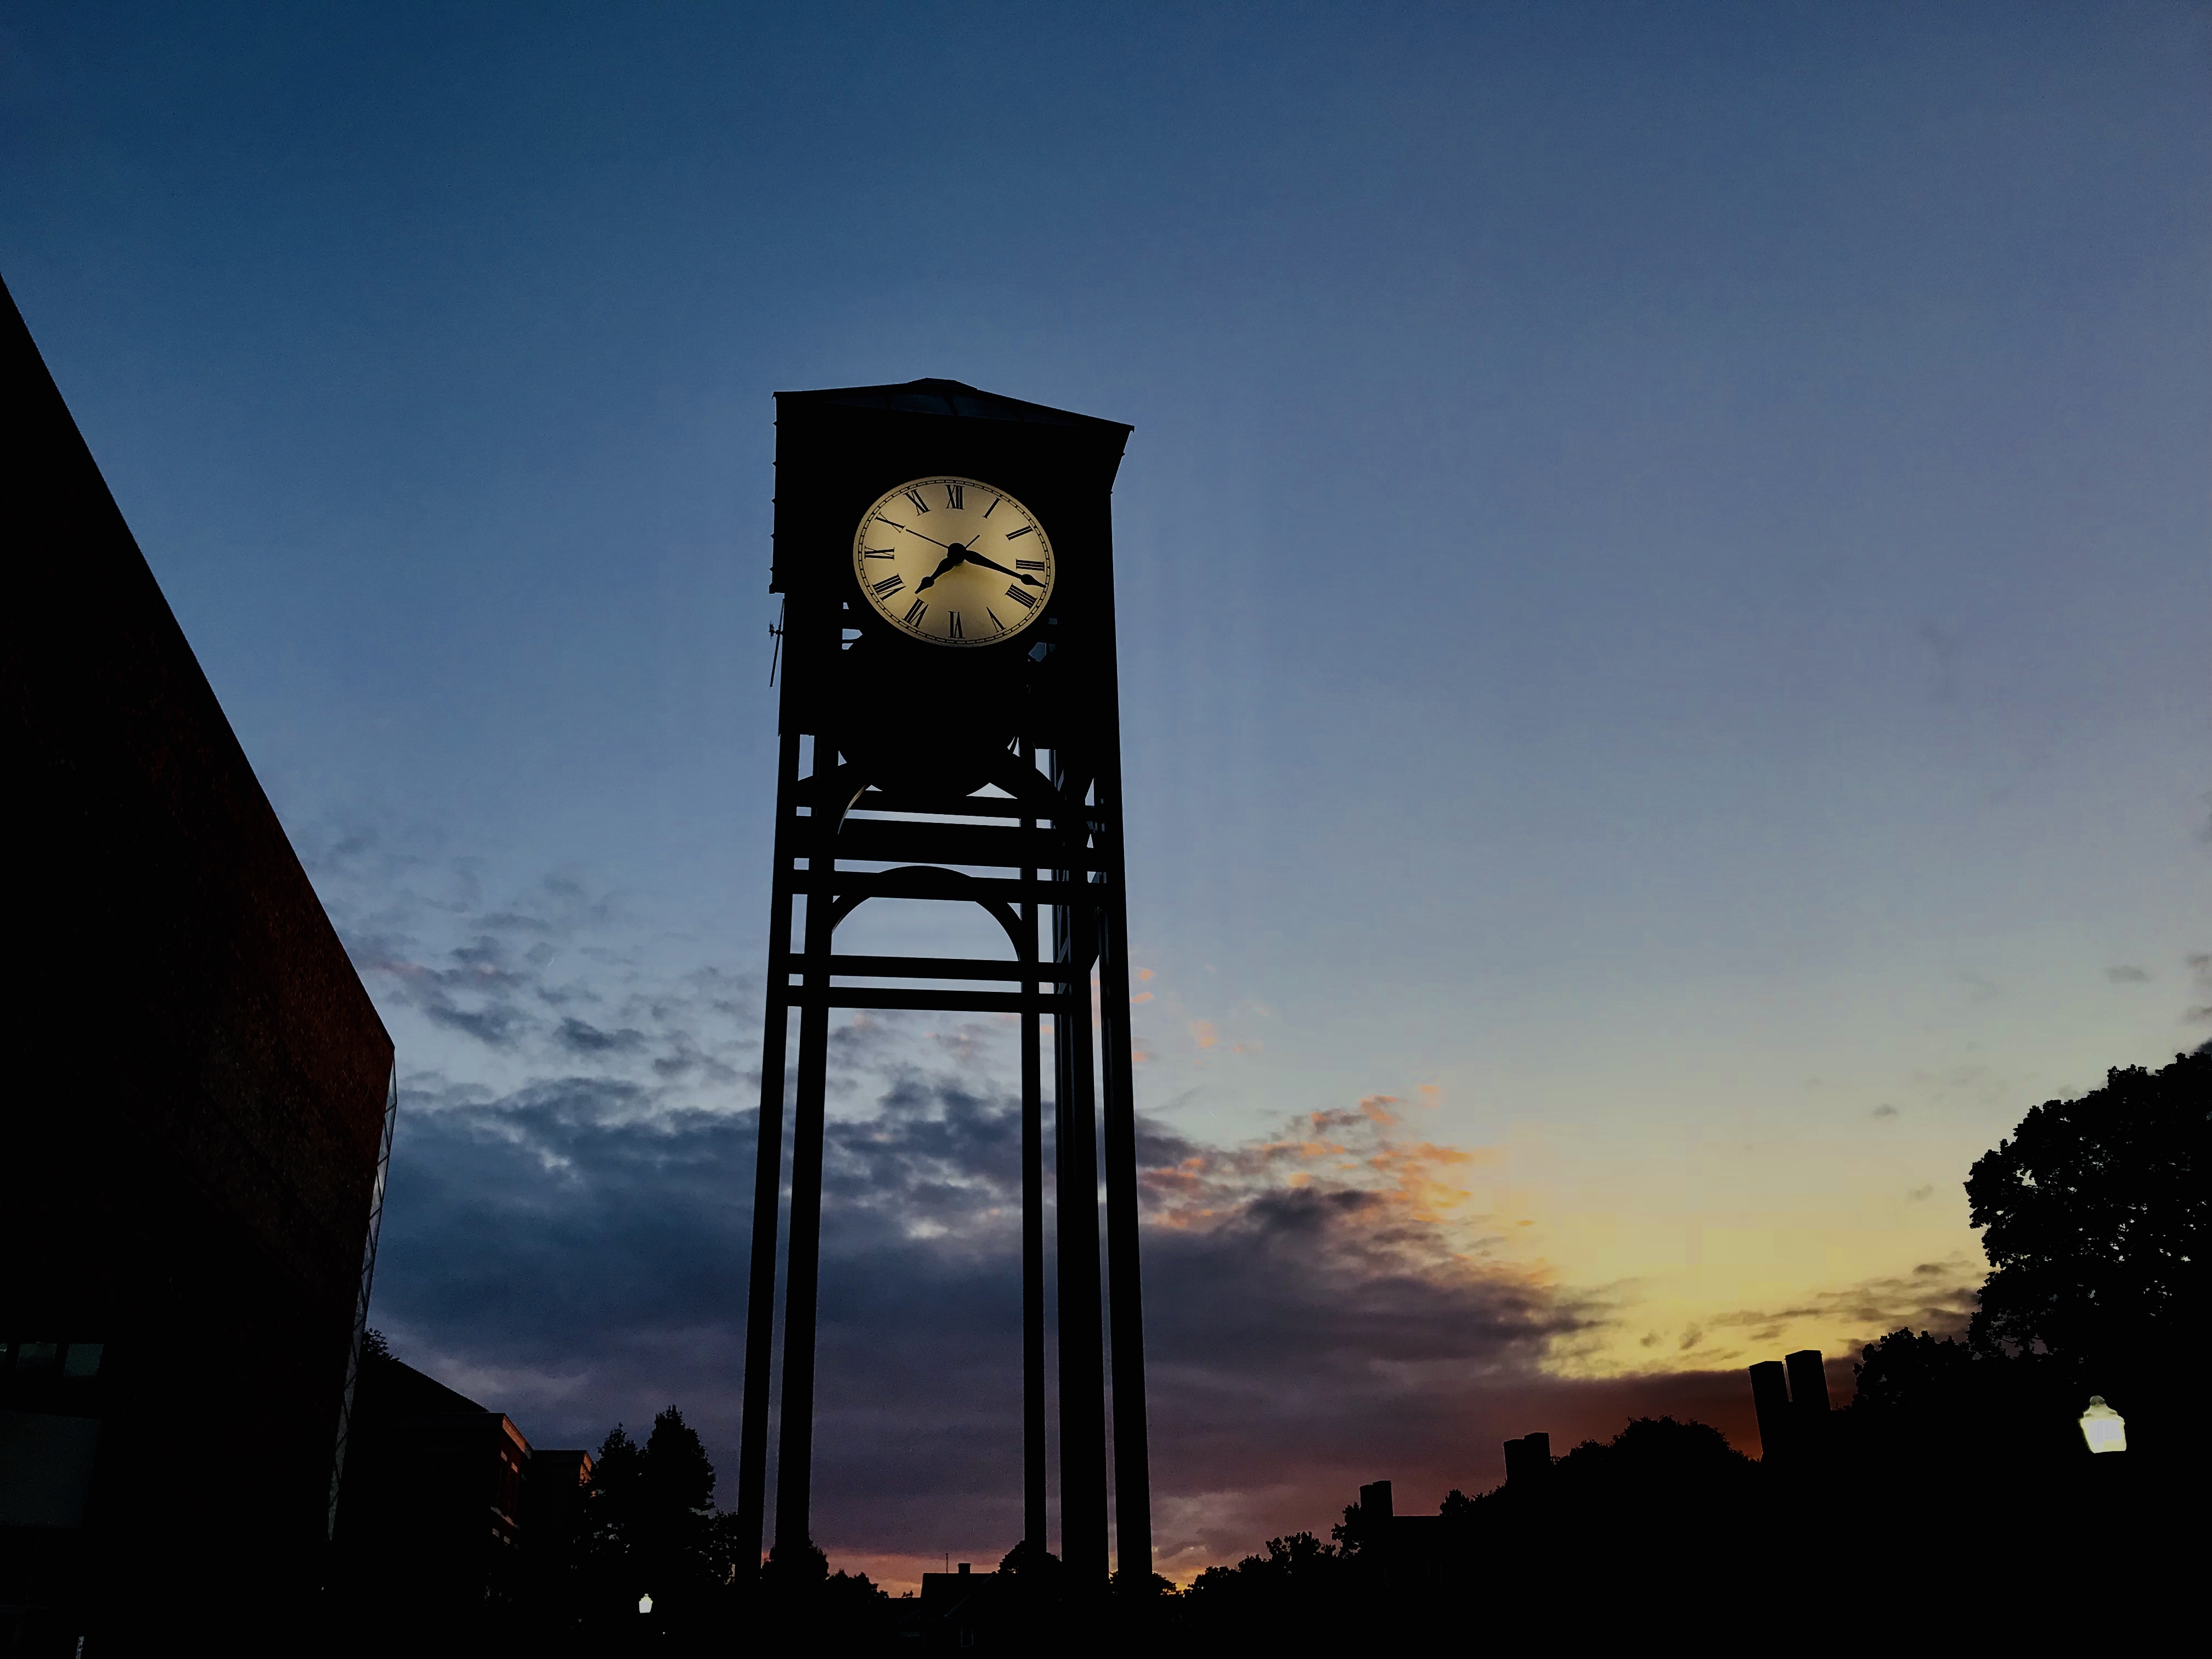 university of rochester clock tower at sunset